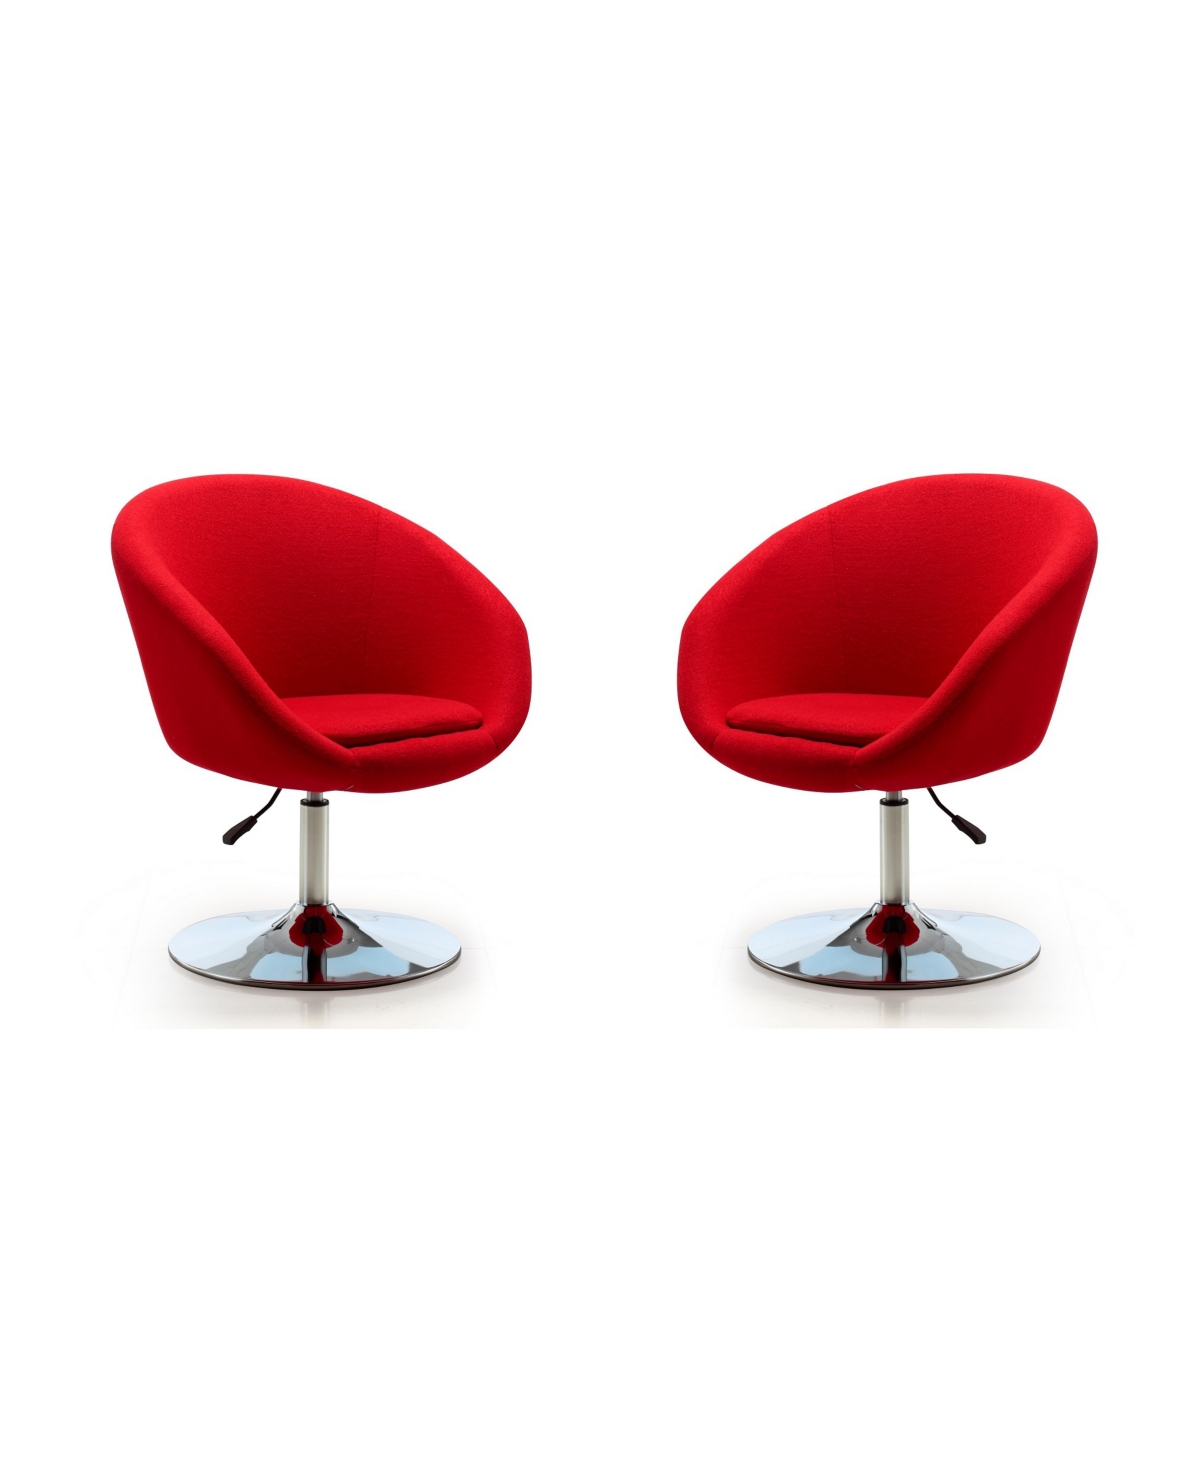 Manhattan Comfort Hopper Swivel Adjustable Height Chair, Set Of 2 In Red,polished Chrome